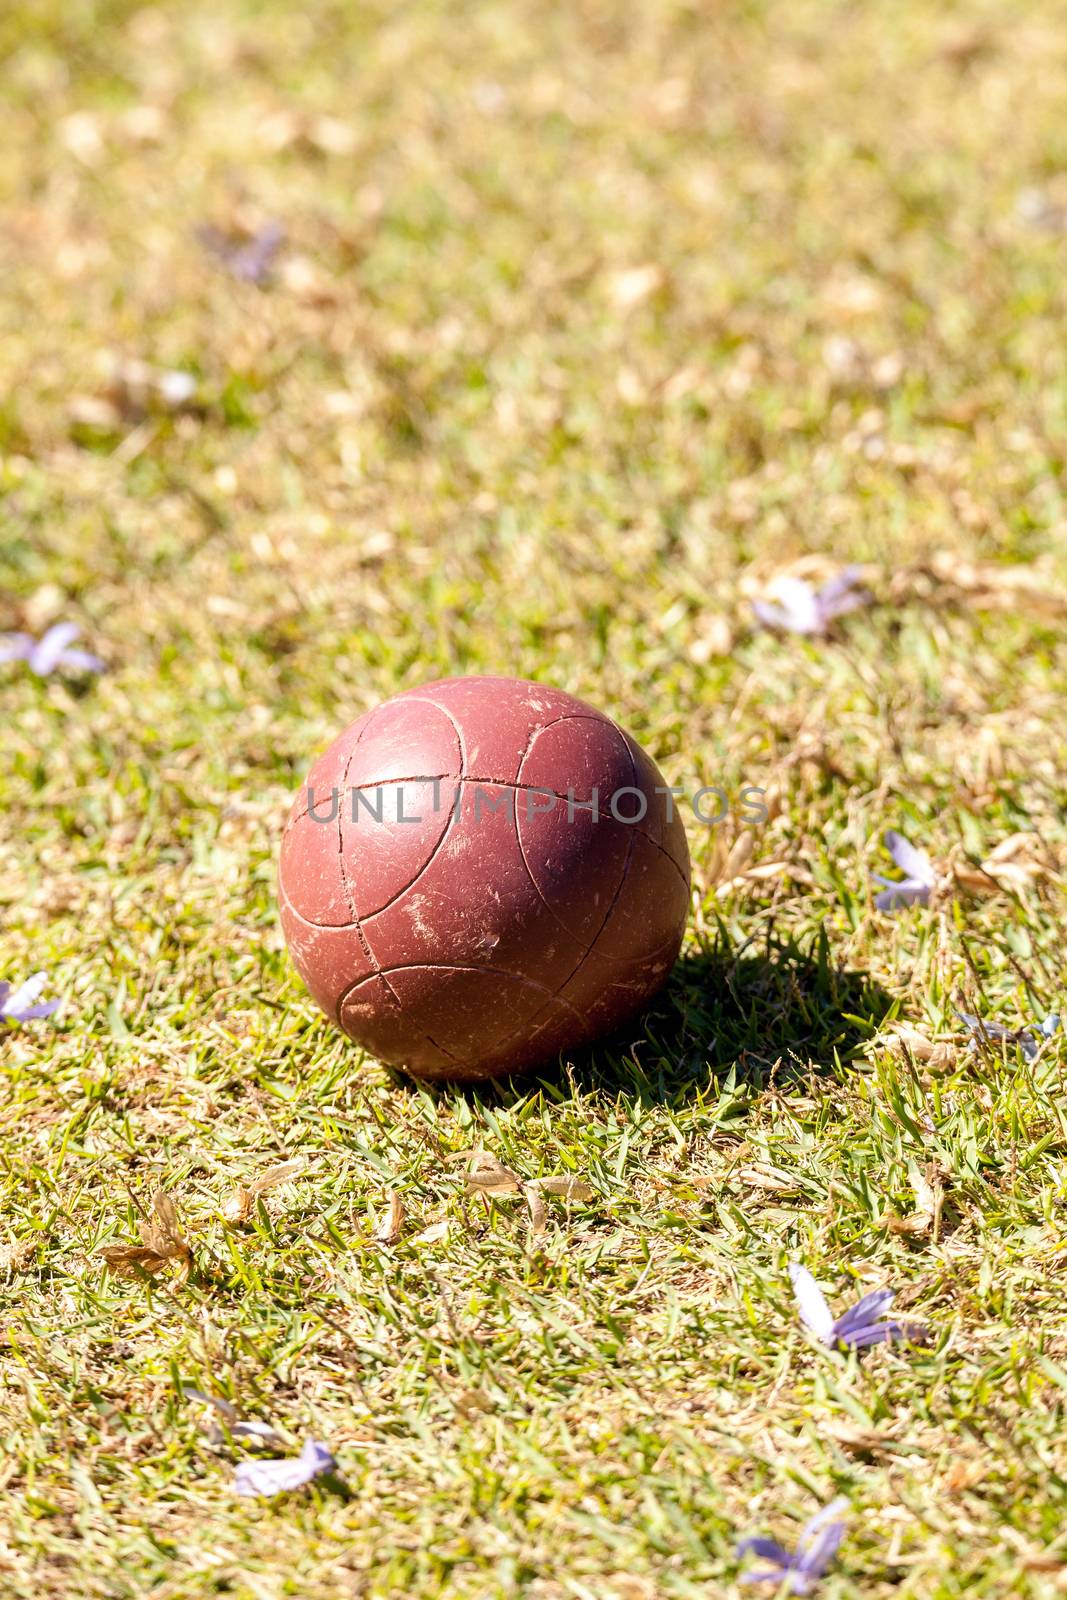 Bocce ball on the green grass of an open field ready for sport in Naples, Florida